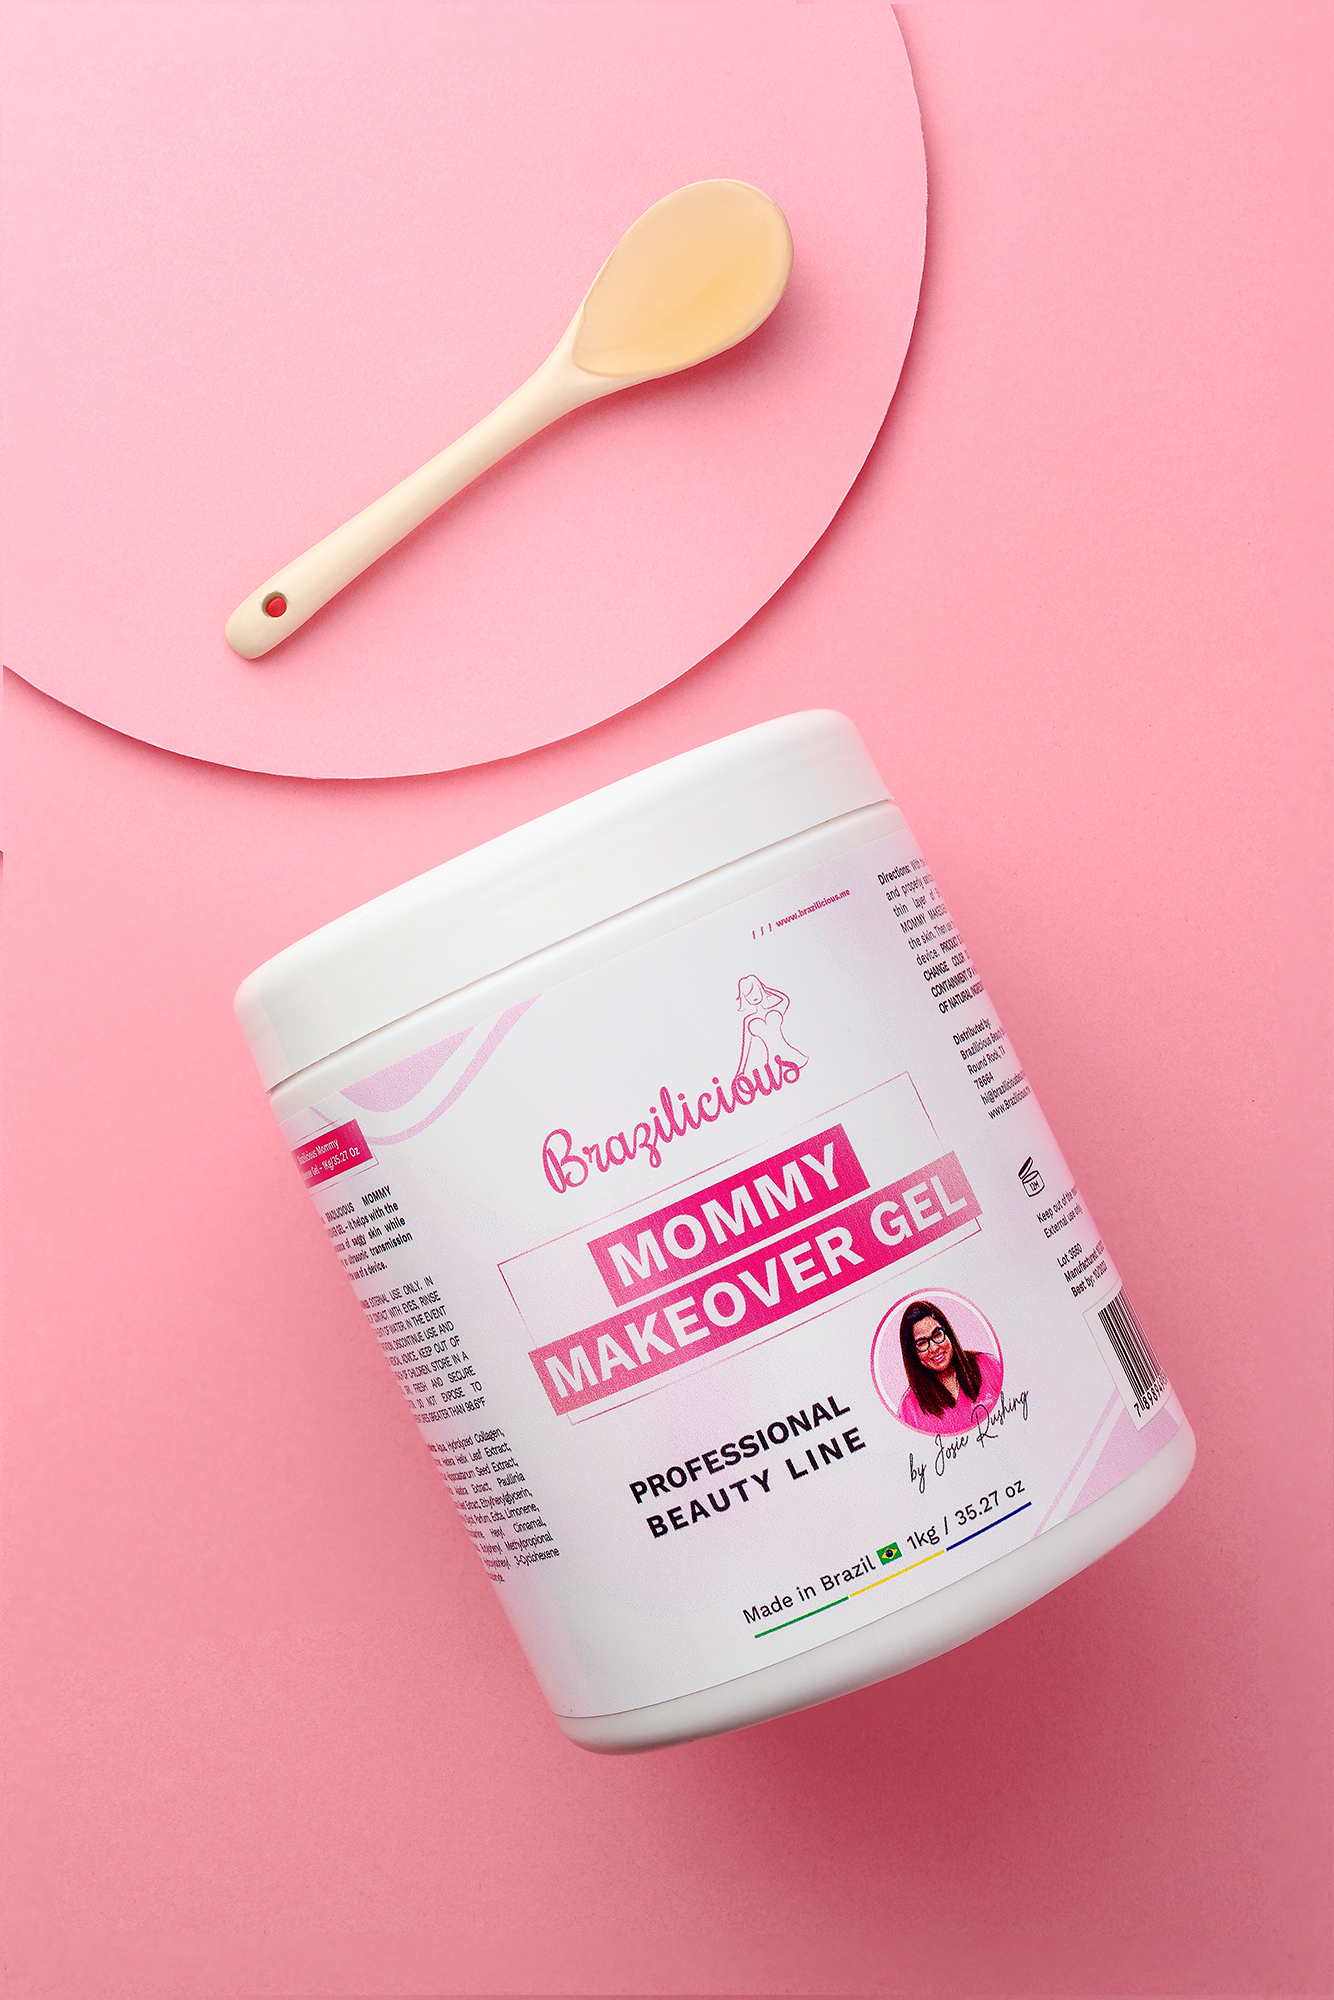 Brazilicious Mommy Makeover Gel